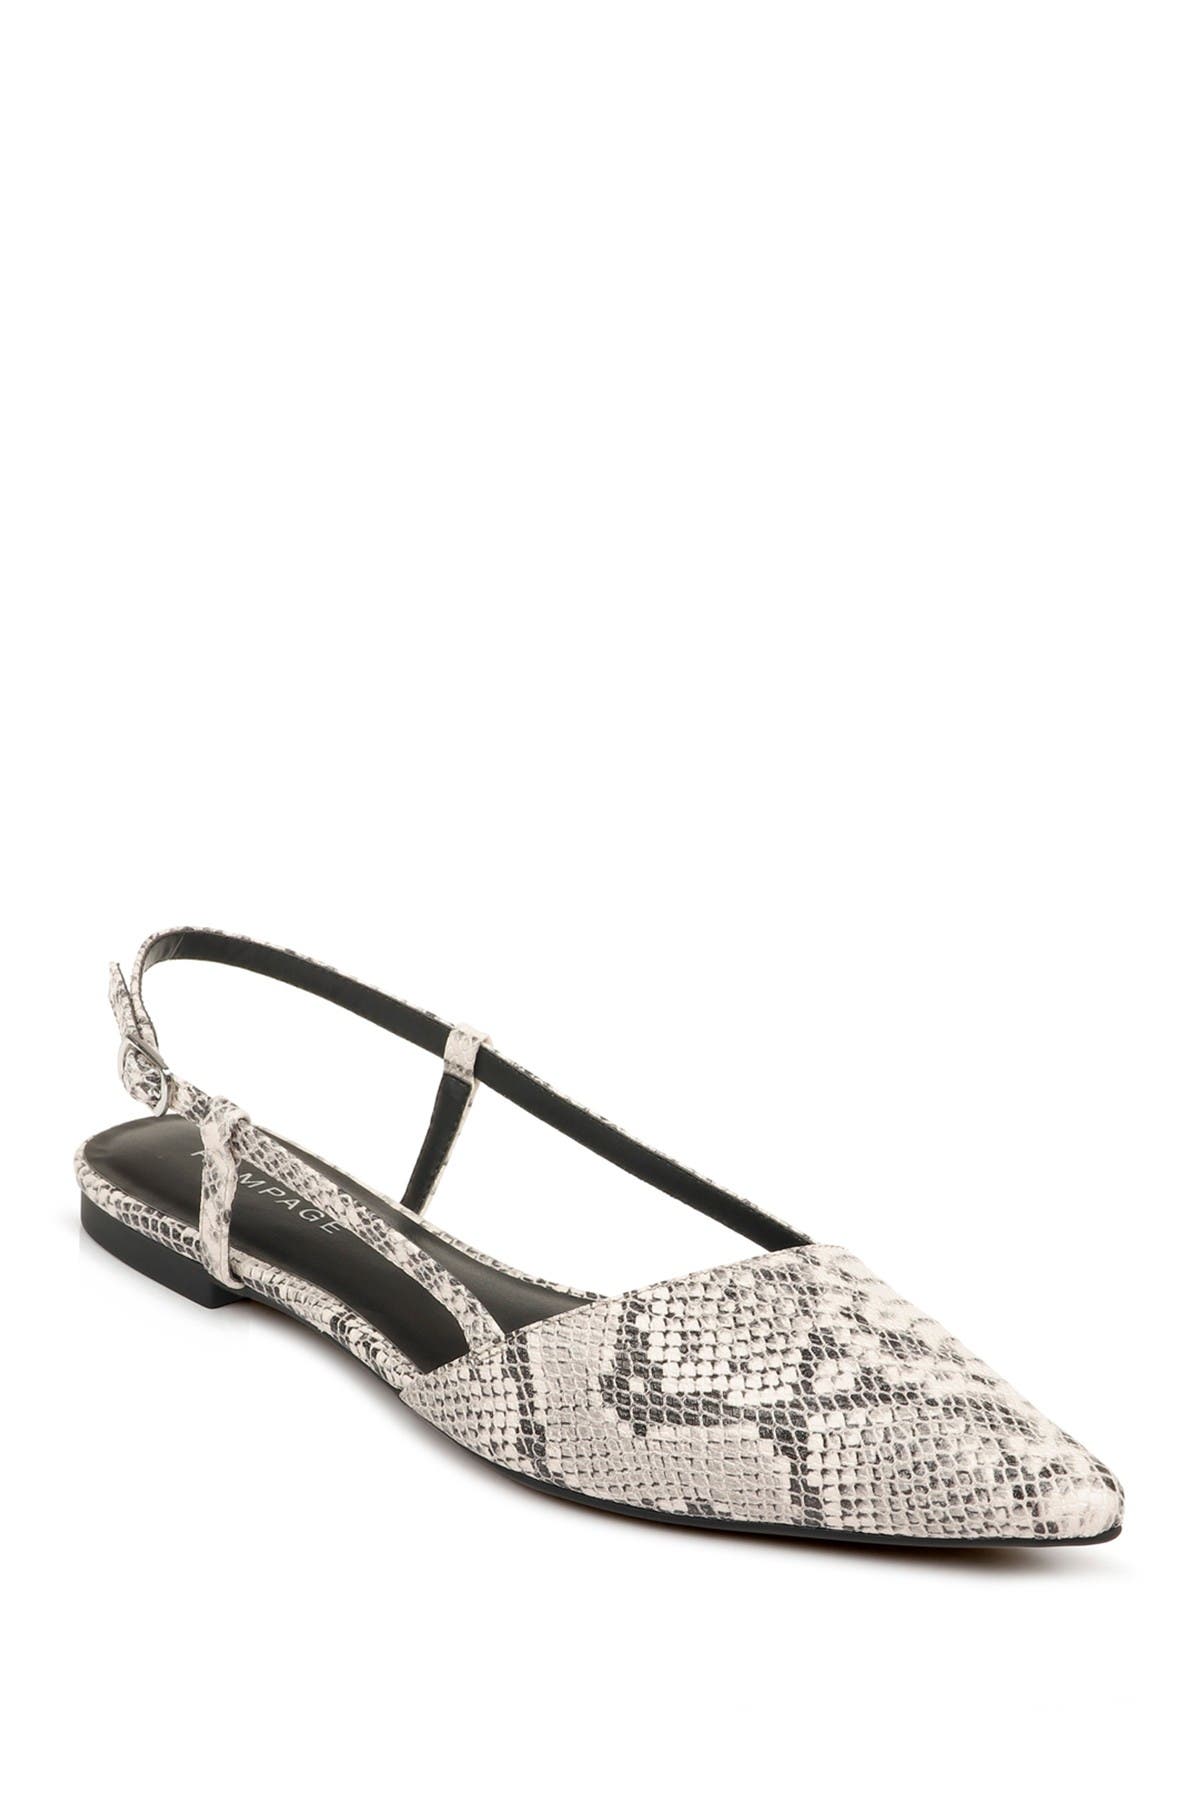 Rampage | Cora Pointed Toe Flat 